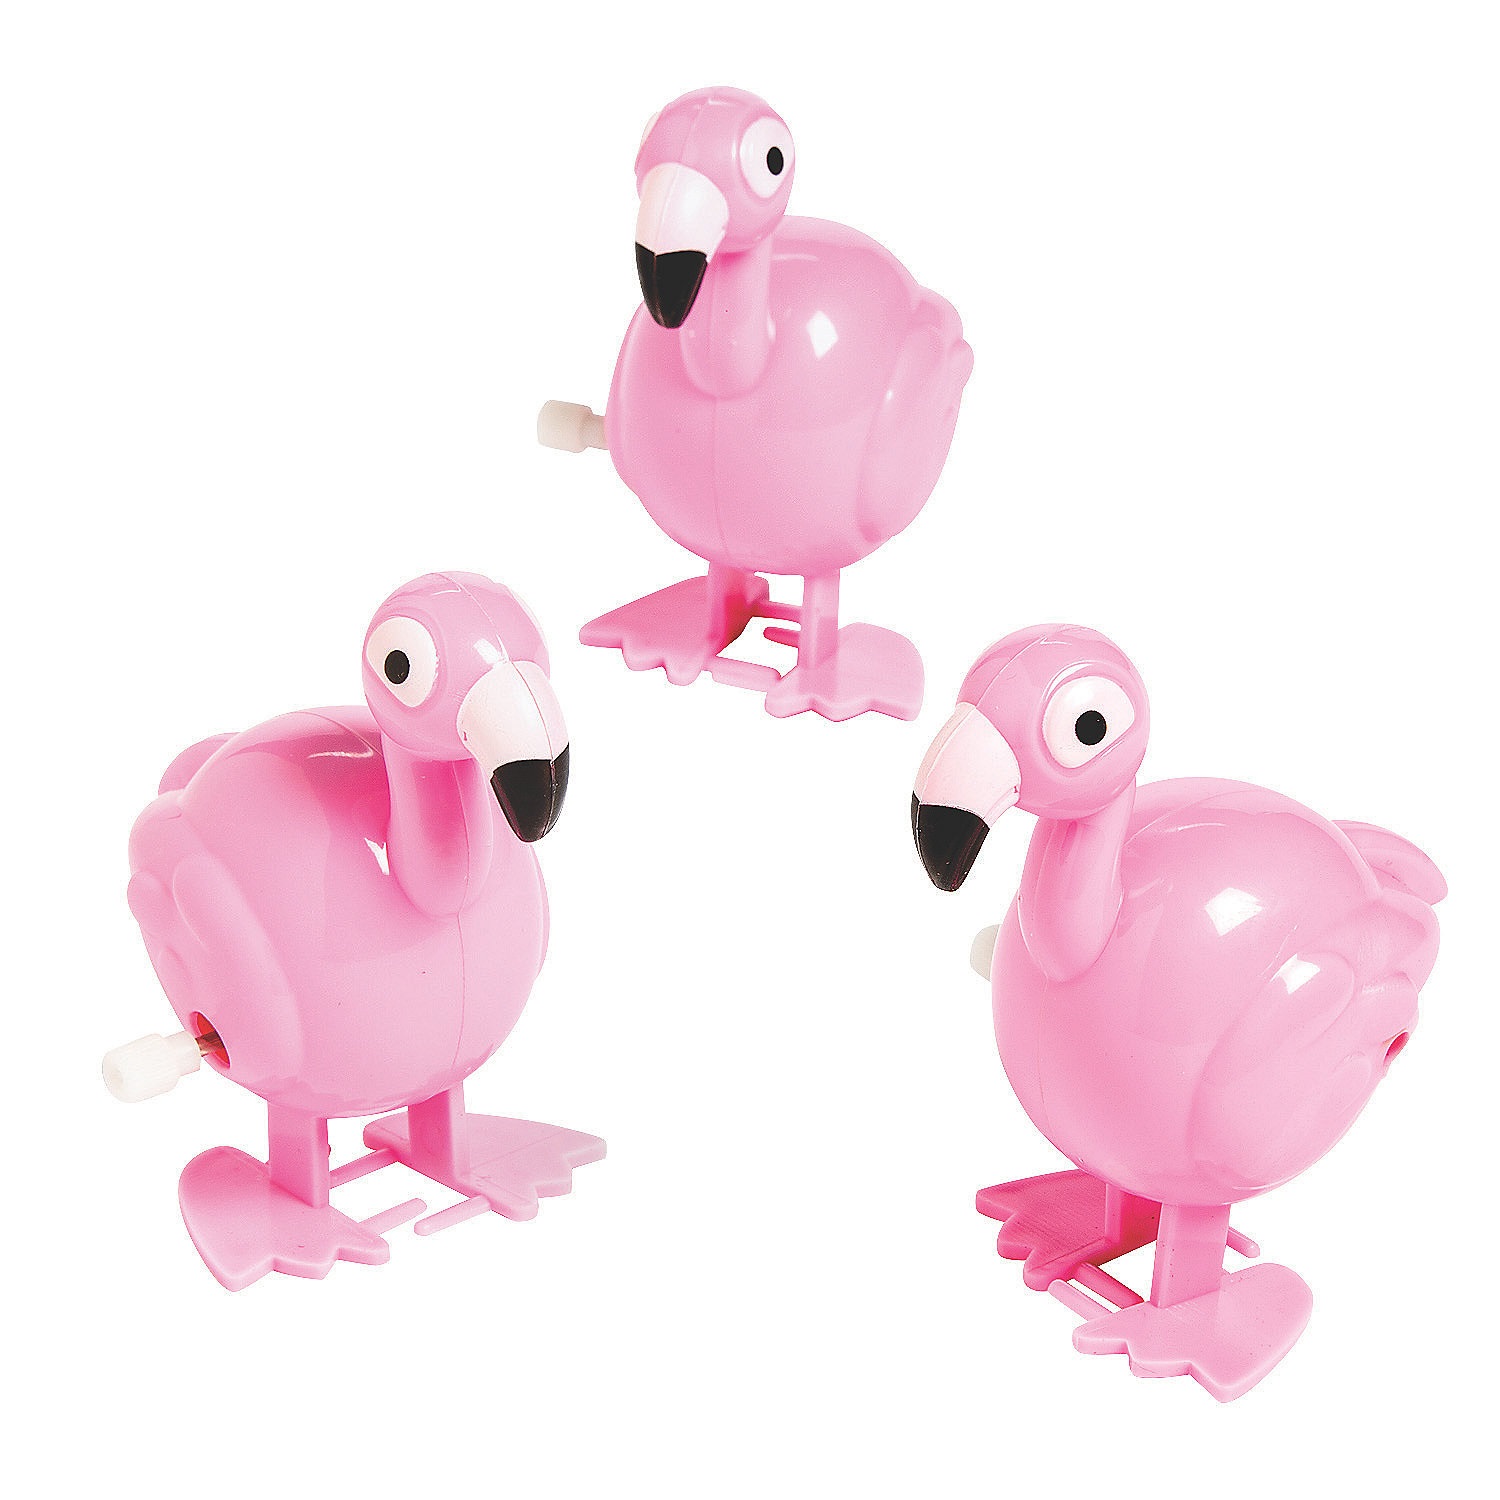 flamingo-wind-up-characters-12-pc-_13824525